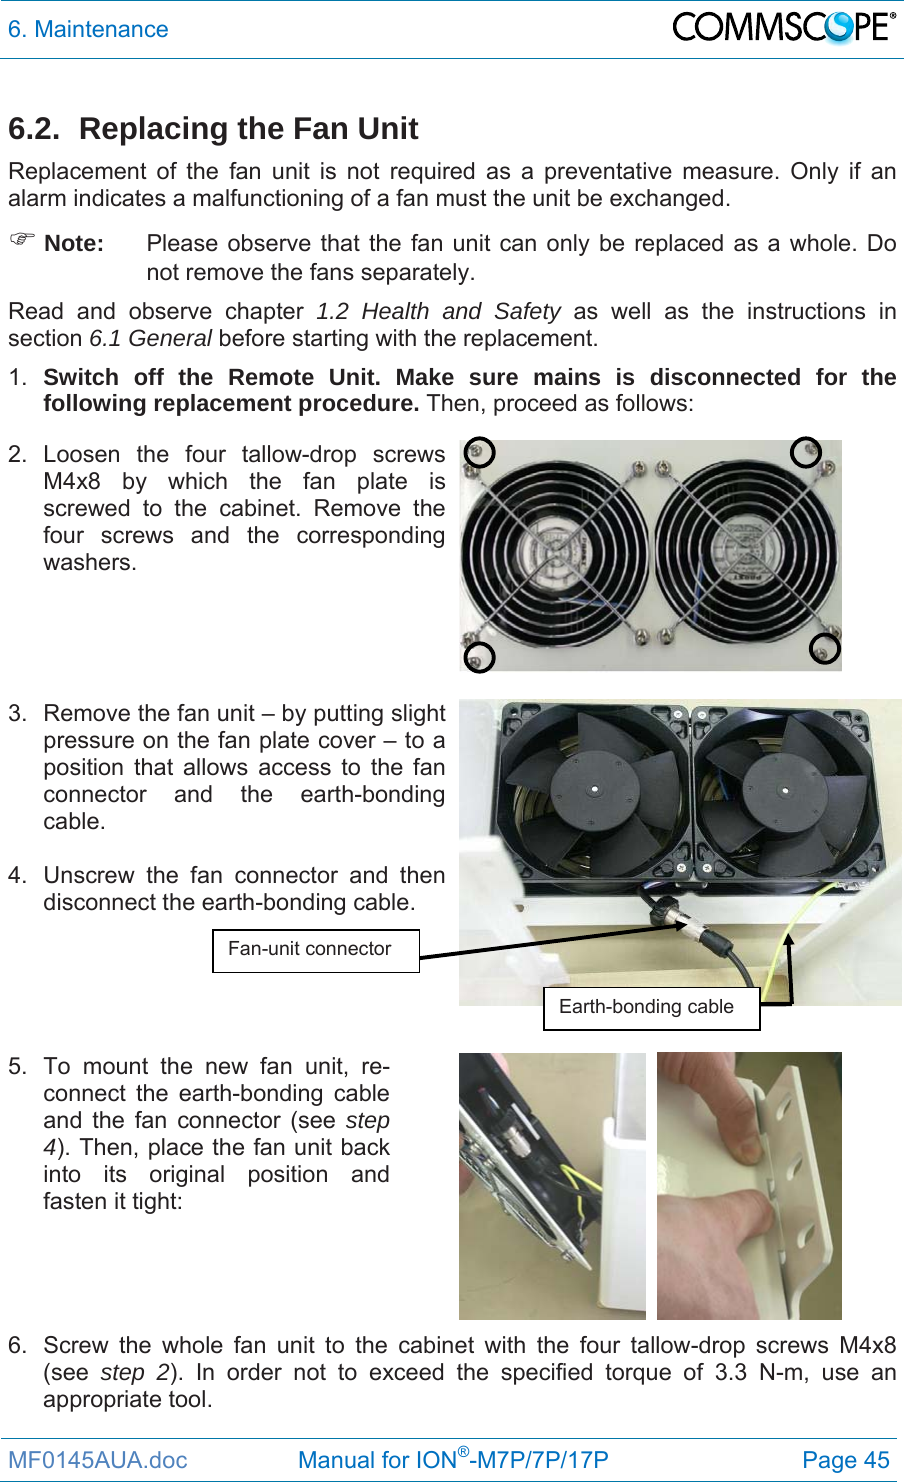 6. Maintenance  MF0145AUA.doc                 Manual for ION®-M7P/7P/17P Page 45 6.2.  Replacing the Fan Unit Replacement of the fan unit is not required as a preventative measure. Only if an alarm indicates a malfunctioning of a fan must the unit be exchanged.  Note:  Please observe that the fan unit can only be replaced as a whole. Do not remove the fans separately.  Read and observe chapter 1.2 Health and Safety as well as the instructions in section 6.1 General before starting with the replacement.  1.  Switch off the Remote Unit. Make sure mains is disconnected for the following replacement procedure. Then, proceed as follows: 2. Loosen the four tallow-drop screws M4x8 by which the fan plate is screwed to the cabinet. Remove the four screws and the corresponding washers.     3.  Remove the fan unit – by putting slight pressure on the fan plate cover – to a position that allows access to the fan connector and the earth-bonding cable.   4.  Unscrew the fan connector and then disconnect the earth-bonding cable.     5.  To mount the new fan unit, re-connect the earth-bonding cable and the fan connector (see step 4). Then, place the fan unit back into its original position and fasten it tight:  6.  Screw the whole fan unit to the cabinet with the four tallow-drop screws M4x8 (see  step 2). In order not to exceed the specified torque of 3.3 N-m, use an appropriate tool. Fan-unit connector Earth-bonding cable 